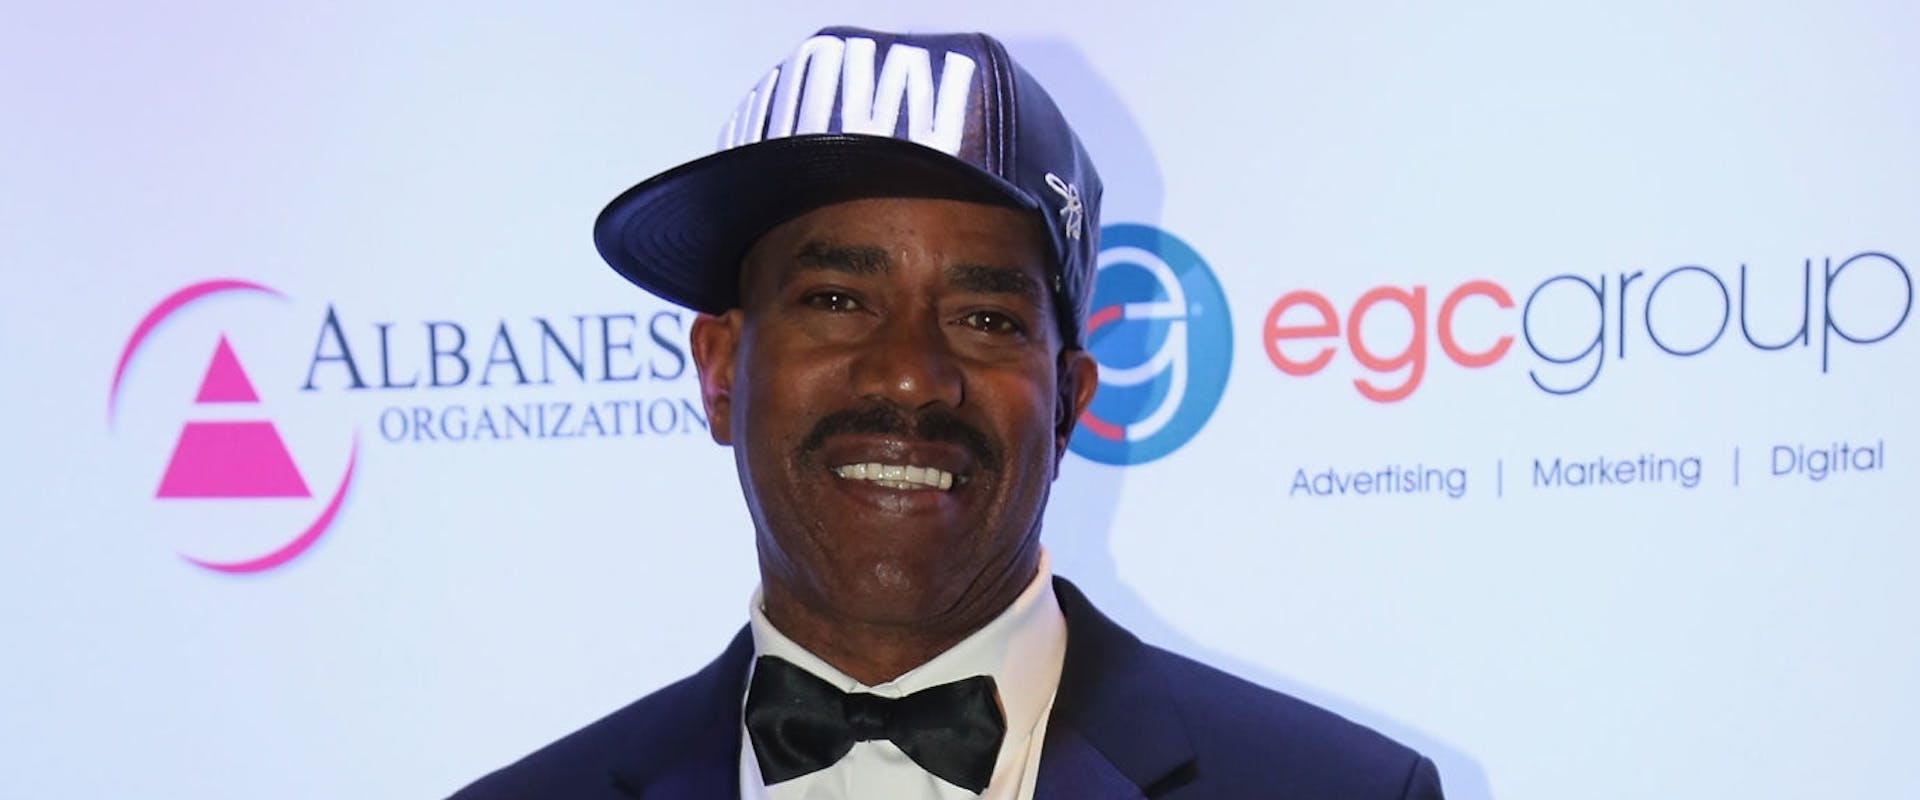 Rapper Kurtis Blow is inducted into the Long Island Music Hall of Fame at the Long Island Music Hall of Fame 5th Annual Gala at The Paramount Theater on October 23, 2014 in Huntington, New York.